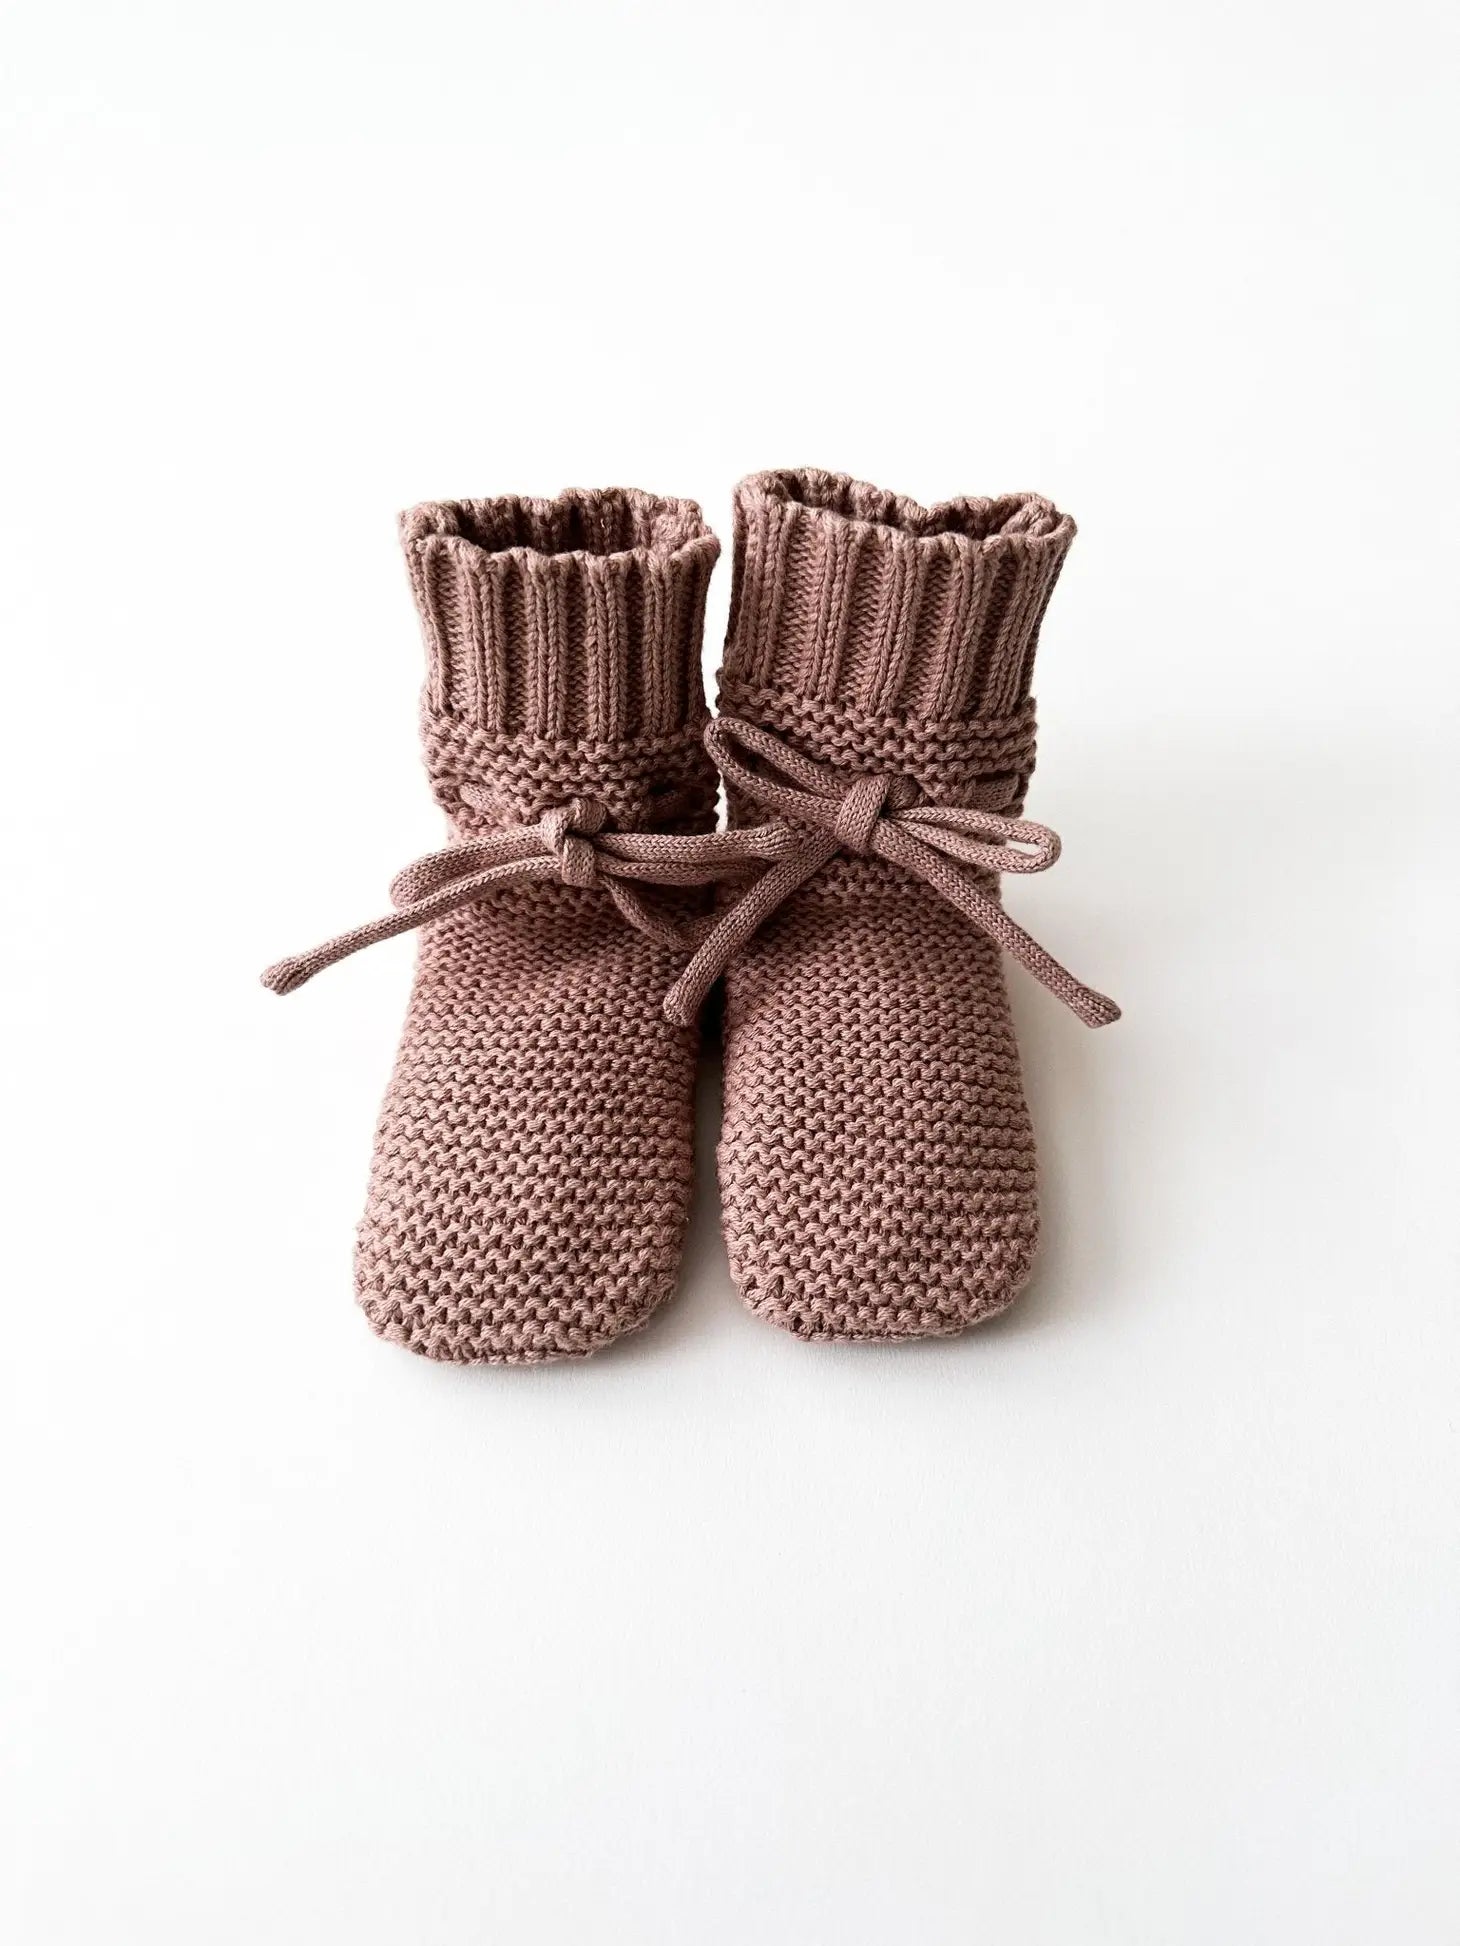 knit booties in baby gift basket